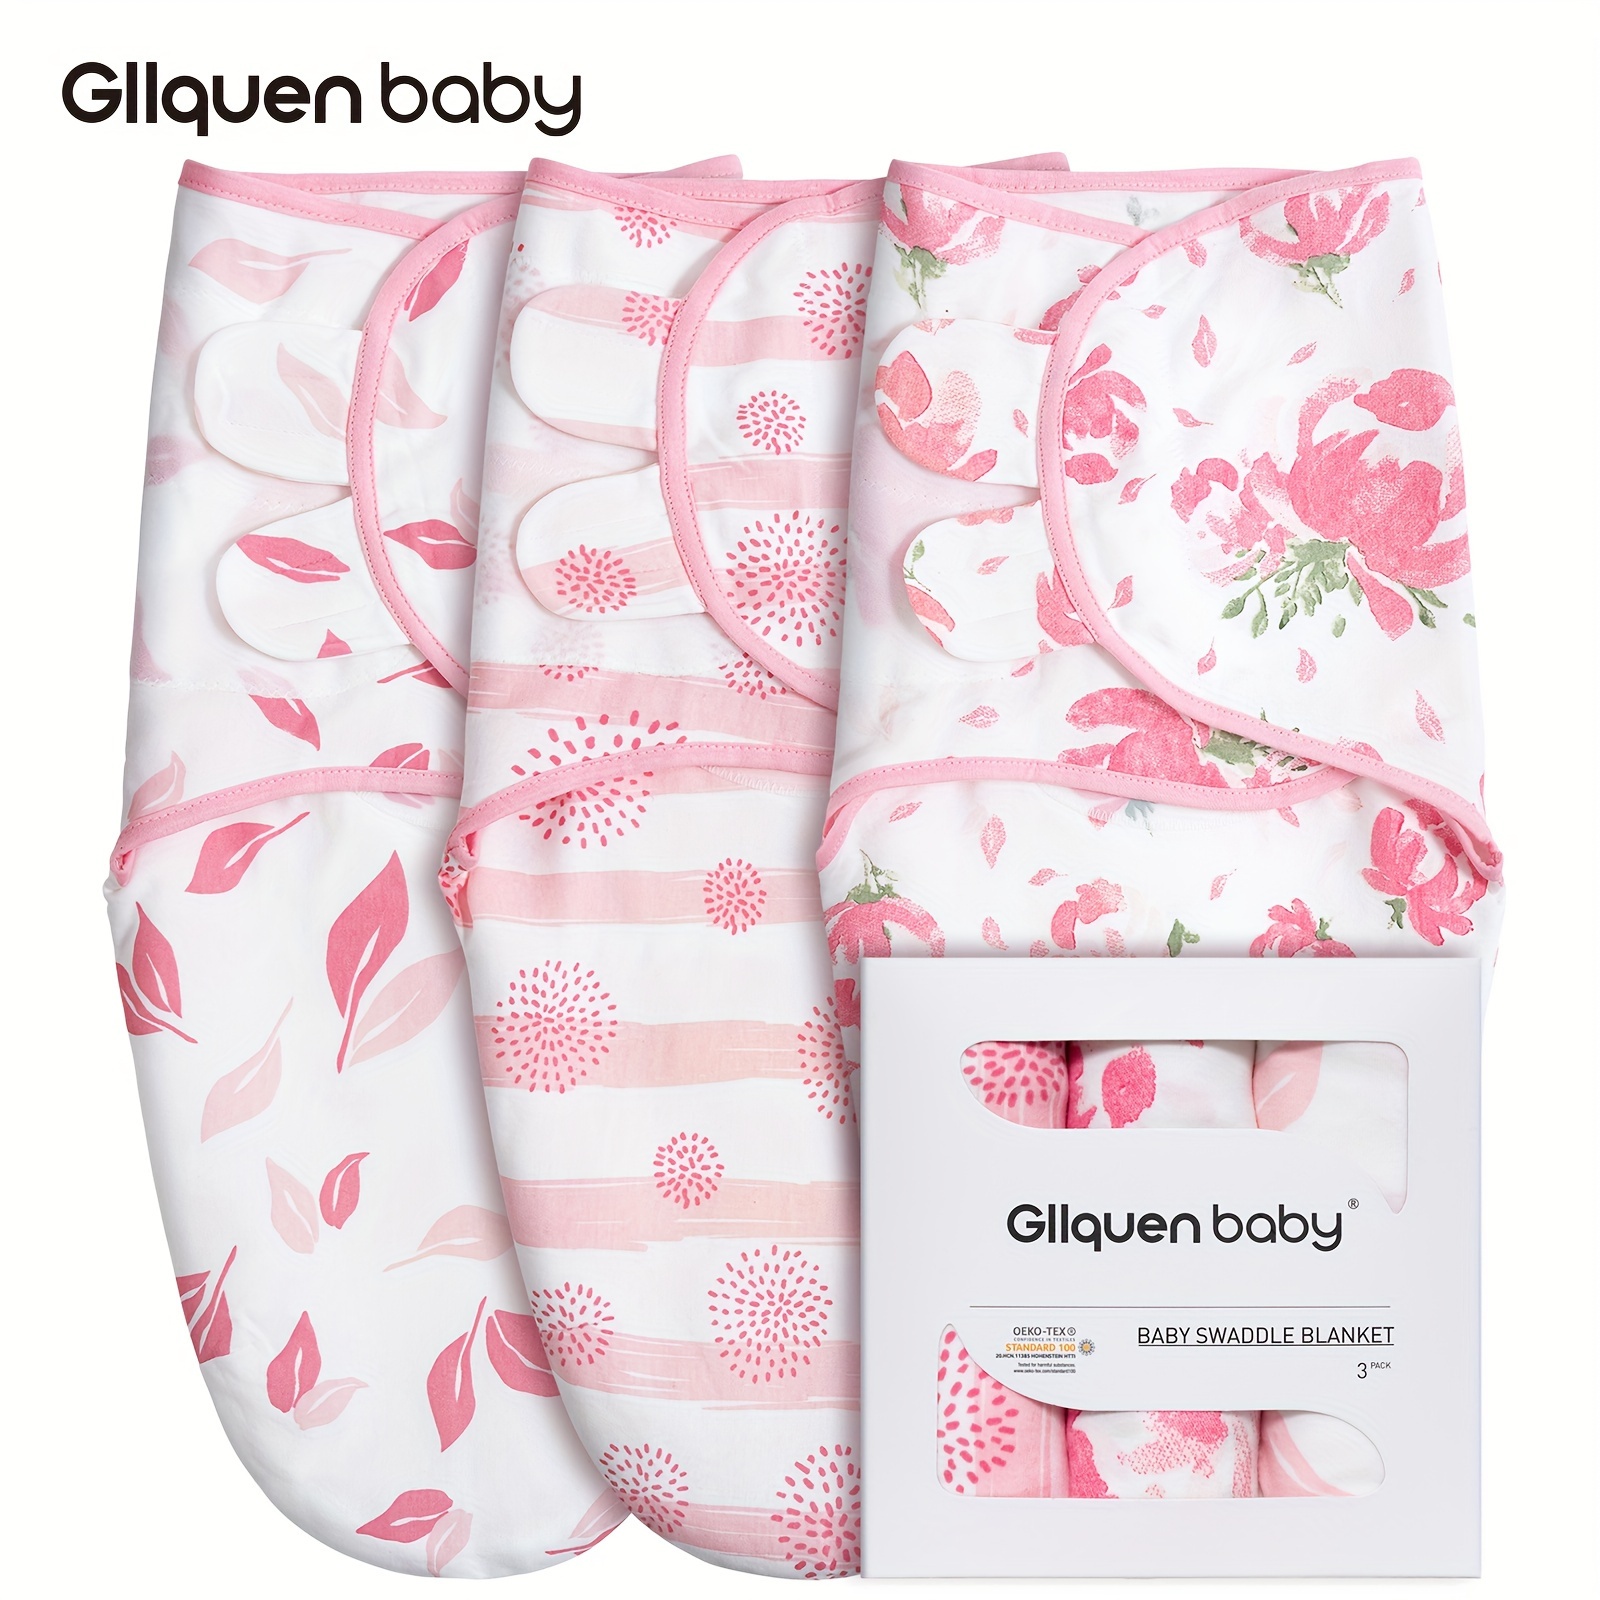 Gllquen Baby Muslin Swaddle Blankets 6-Pack, Swaddle Wrap Neutral